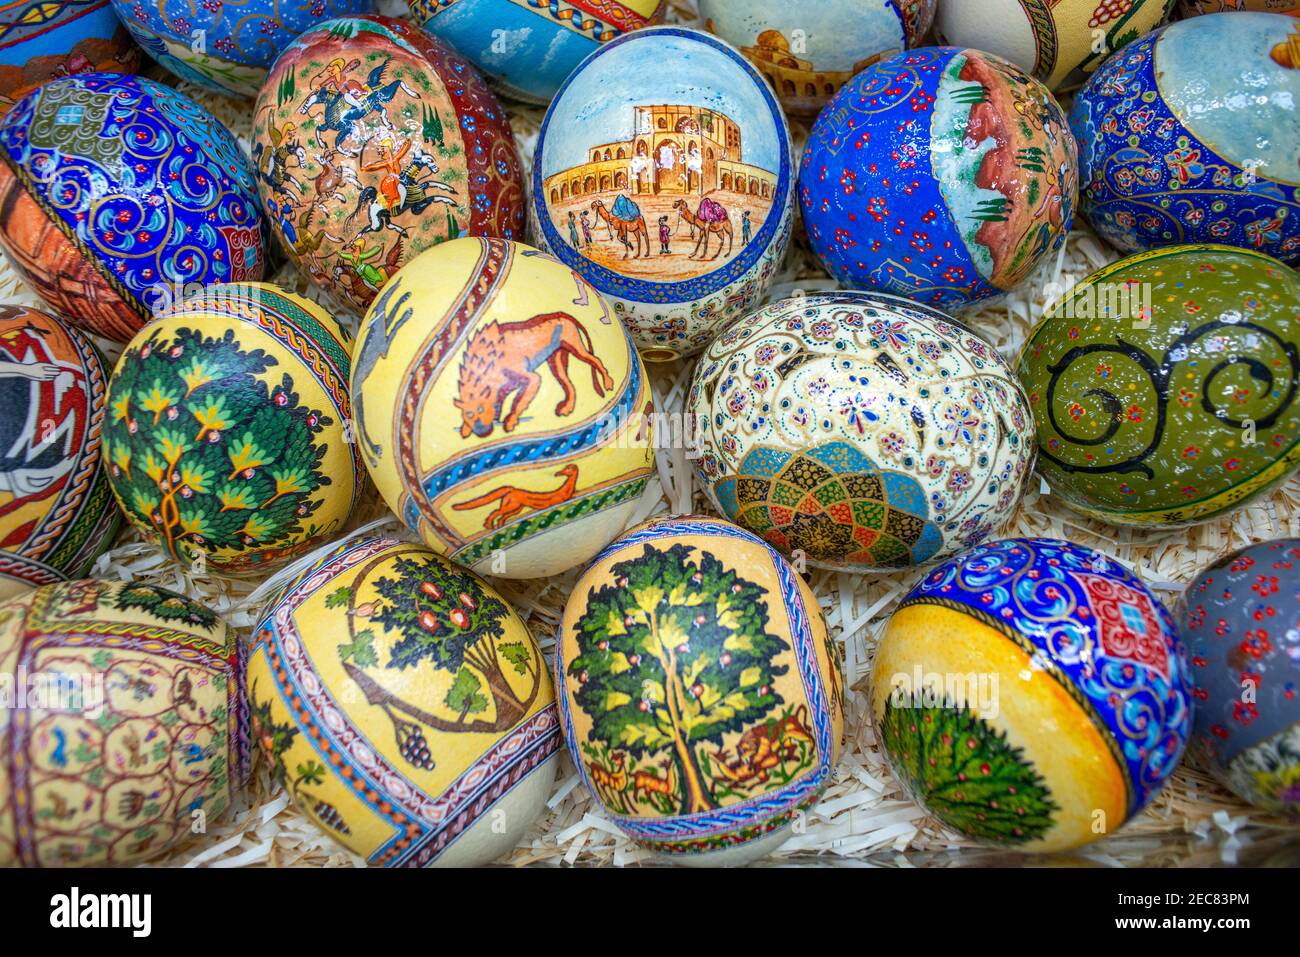 The eggs are covered with fine mosaics on biblical themes. Jordan souvenirs. Asia, Middle East, Jordan, Madaba, mosaic artwork Stock Photo